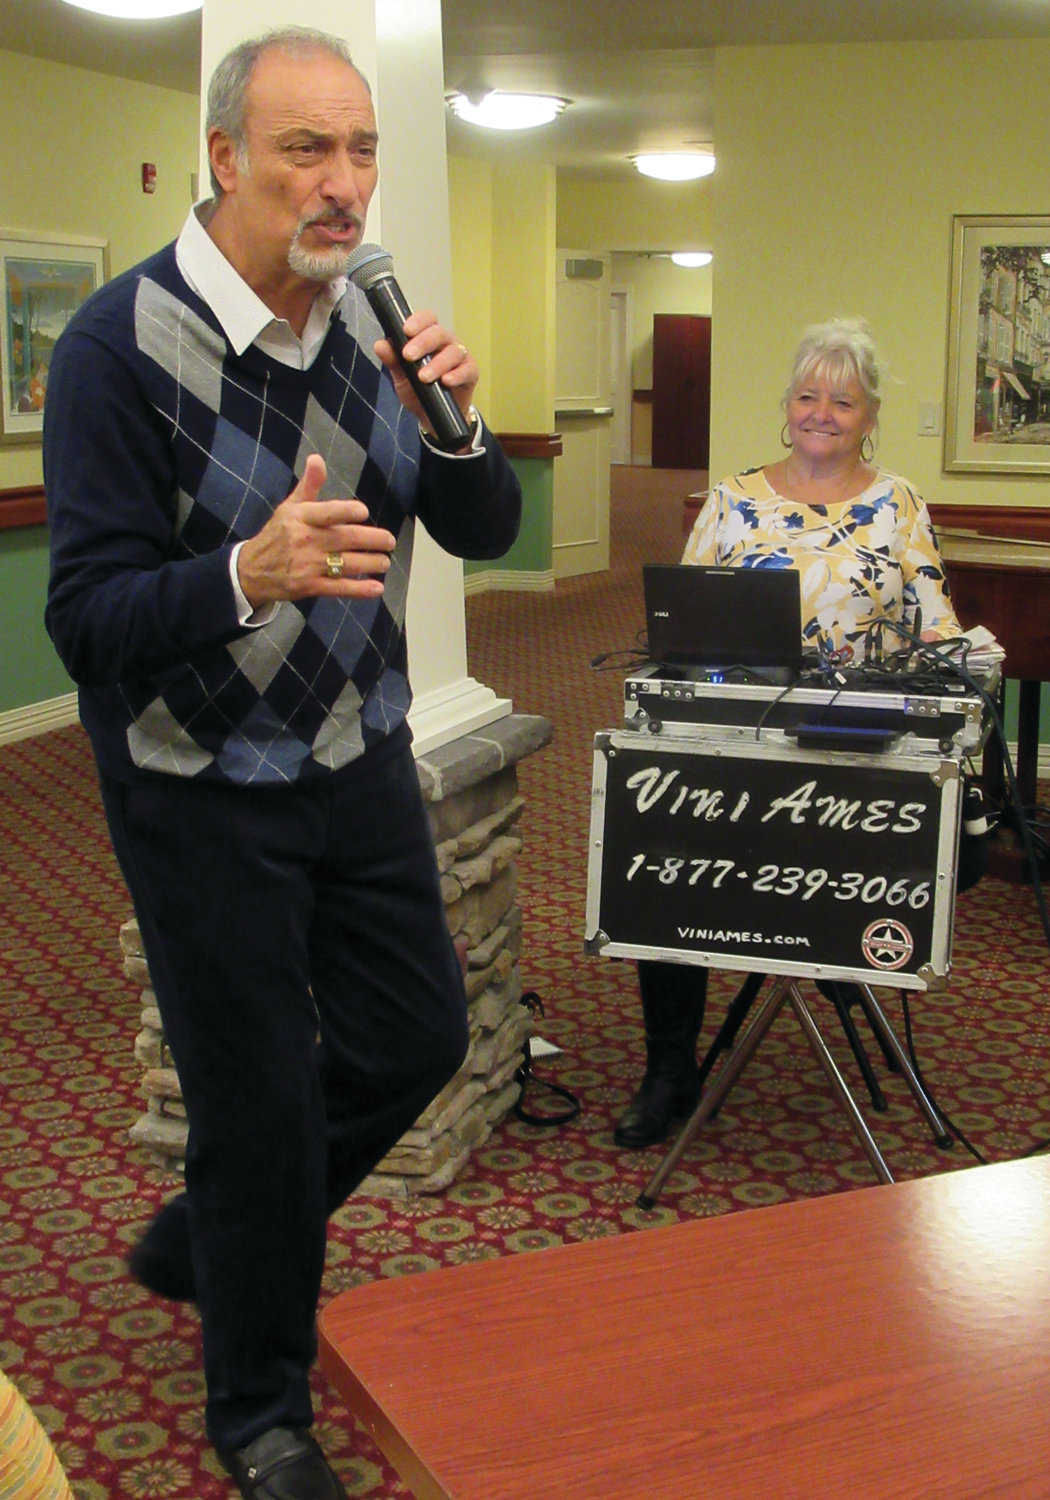 MIGHTY MUSIC: Vini Ames sings one his many old-time favorites – Frank Sinatra’s “Summer Wind” – during the annual black Friday Party at Briarcliffe Gardens.